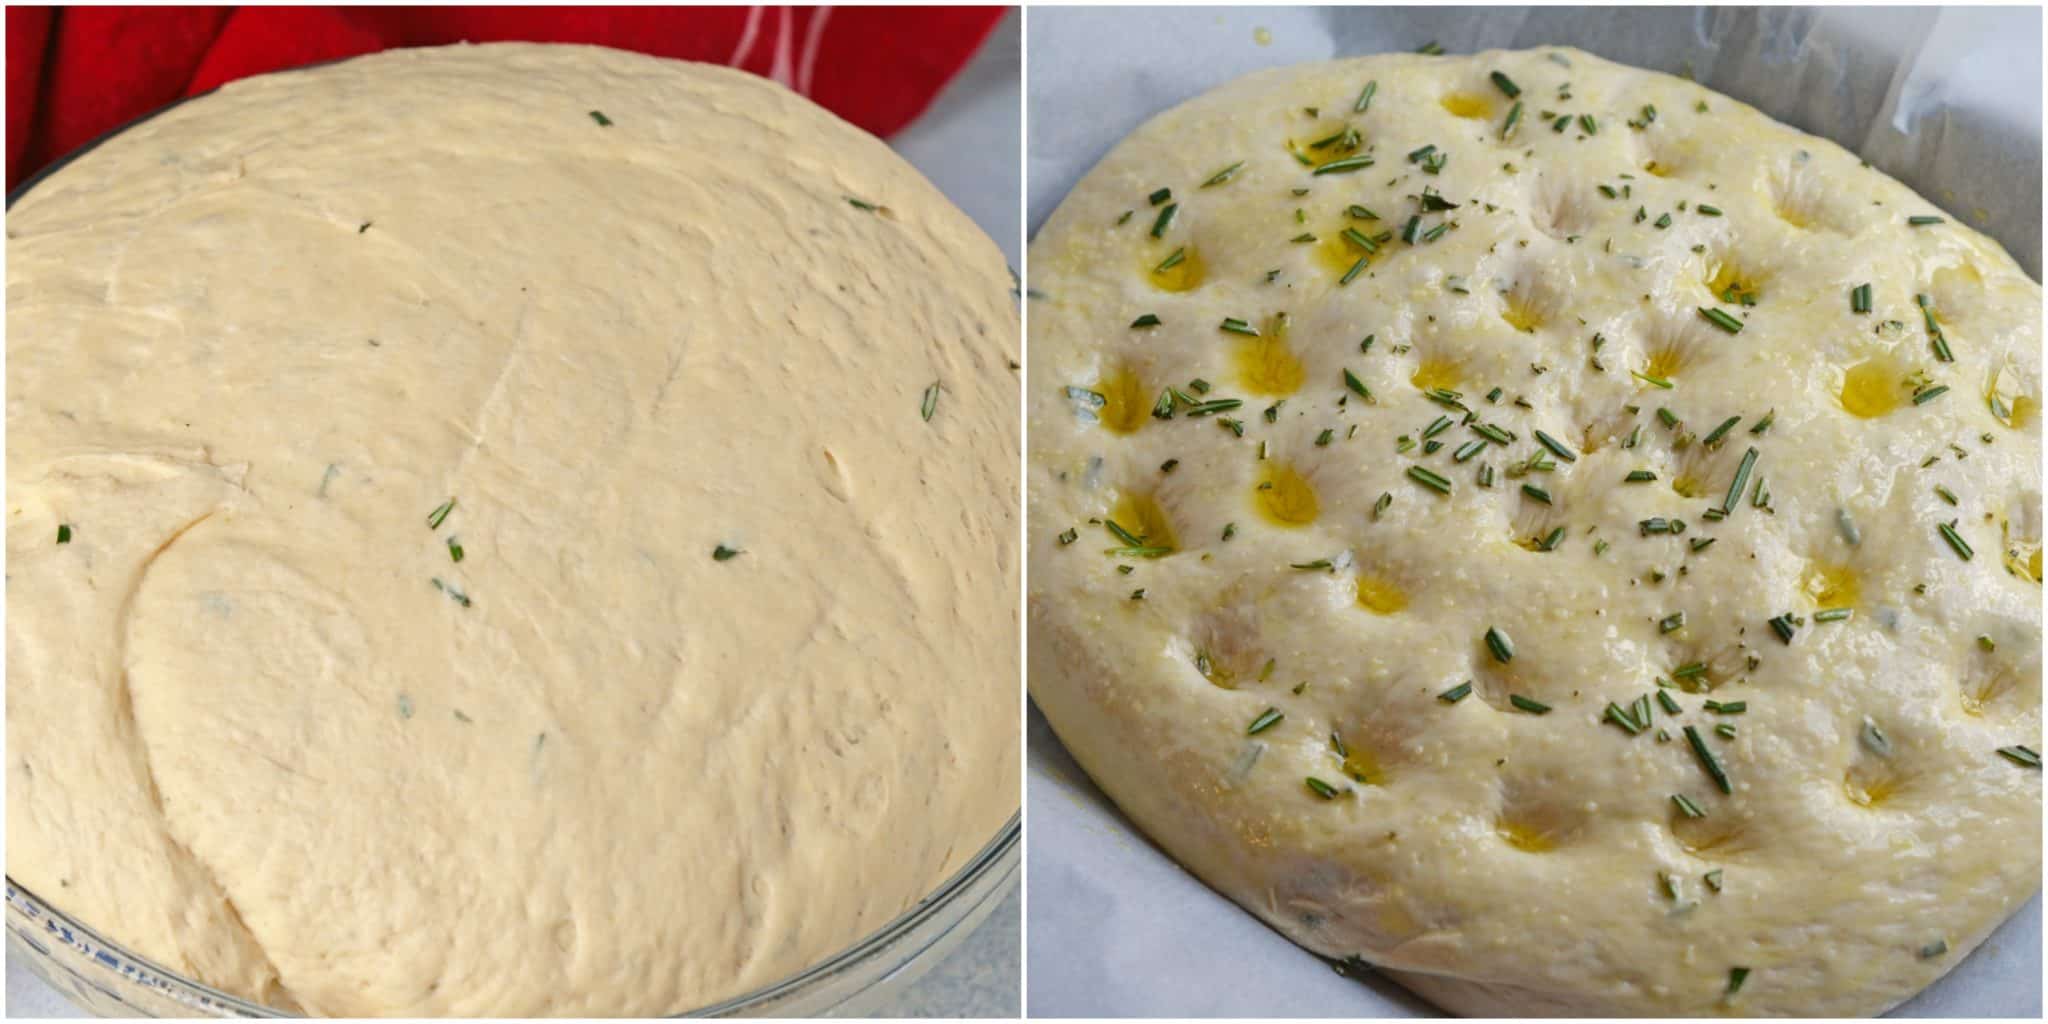 Rosemary Focaccia Bread is a recipe you can be proud of! Pair with homemade butter or olive oil bread dip for the best appetizer.  #focacciabread #easybreadrecipes www.savoryexperiments.com